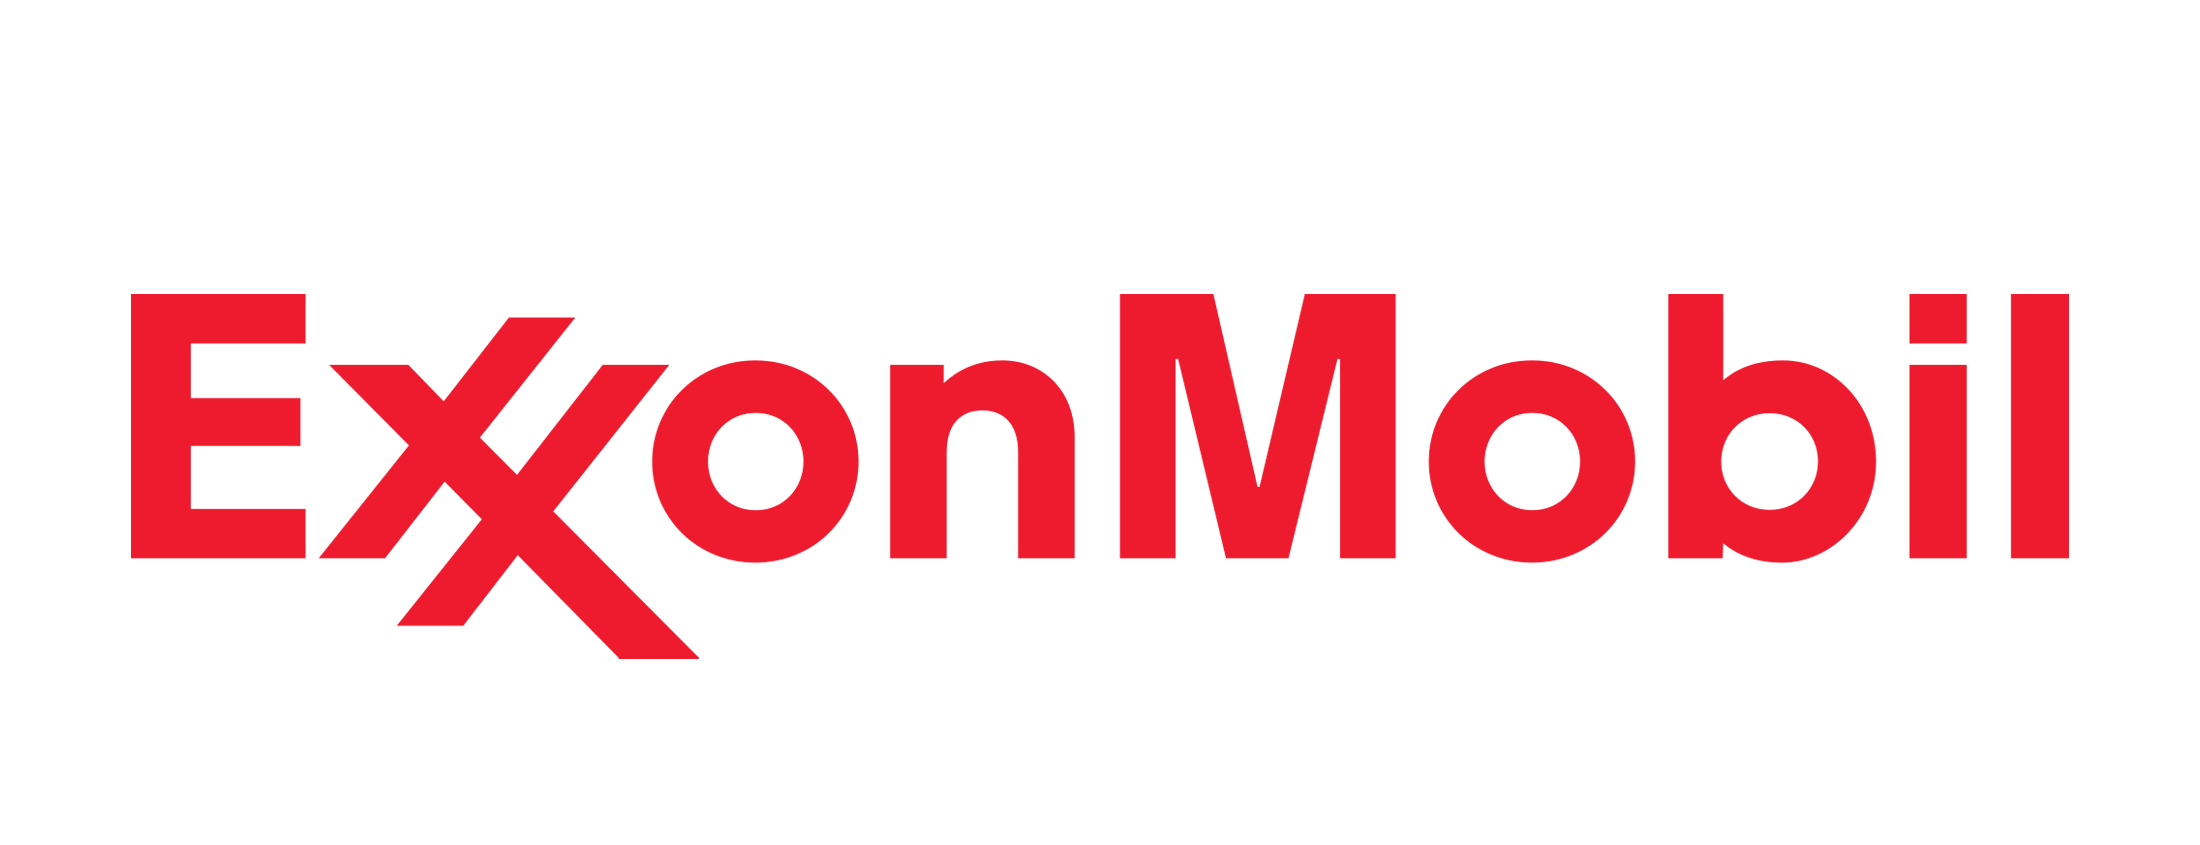 ExxonMobil will be visiting t